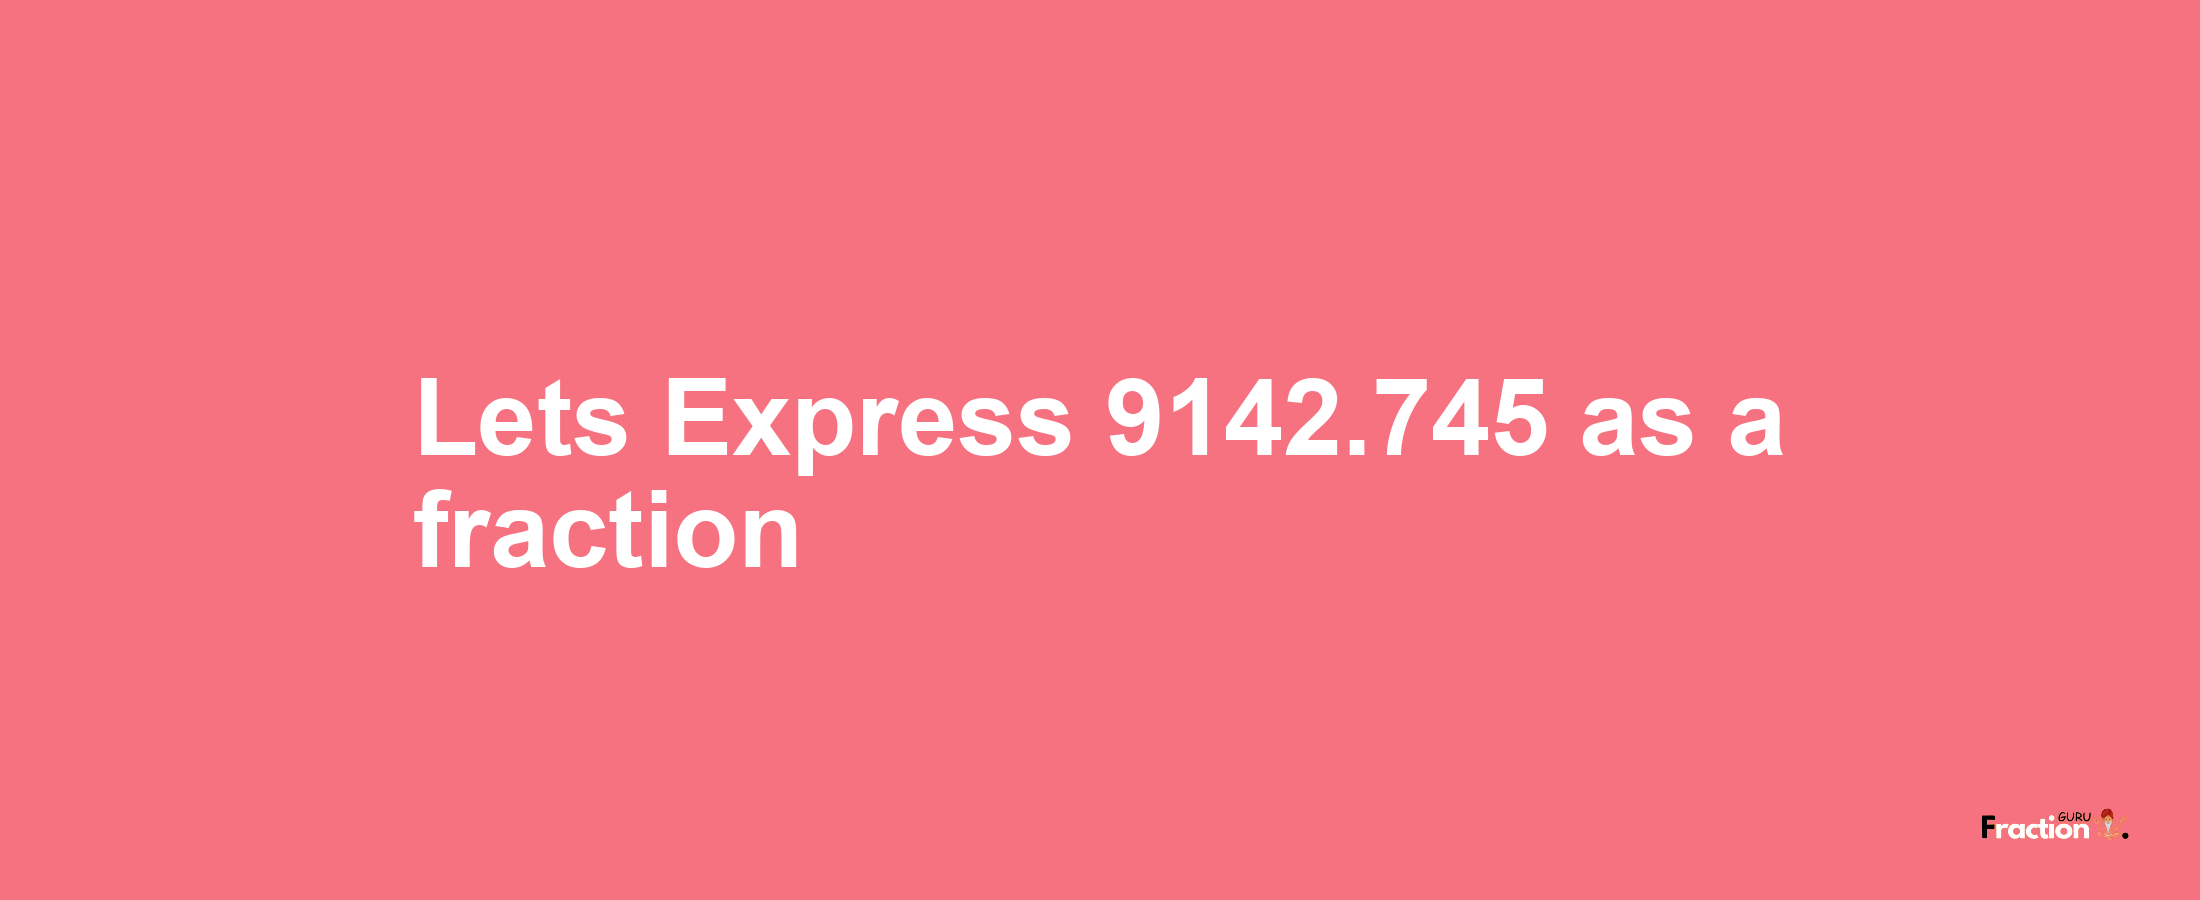 Lets Express 9142.745 as afraction